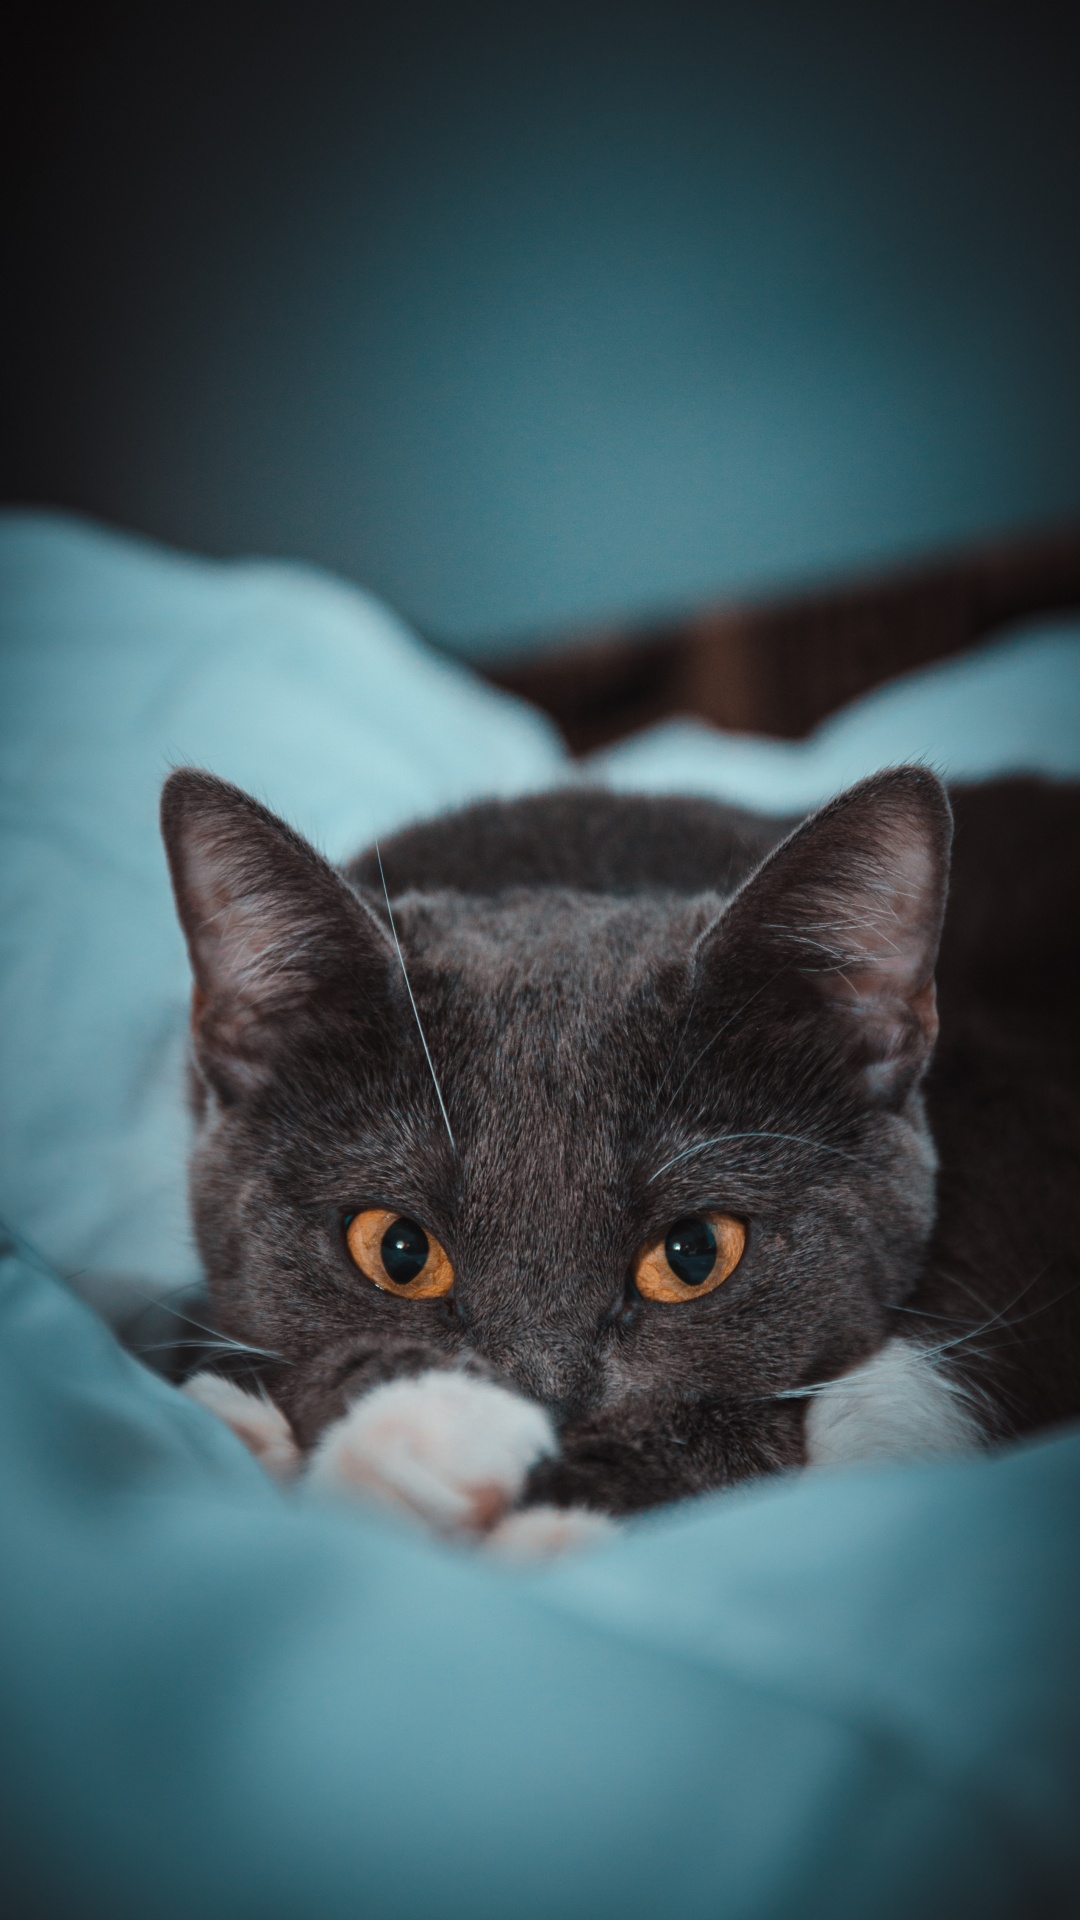 Black and White Cat on Teal Textile. Wallpaper in 1080x1920 Resolution